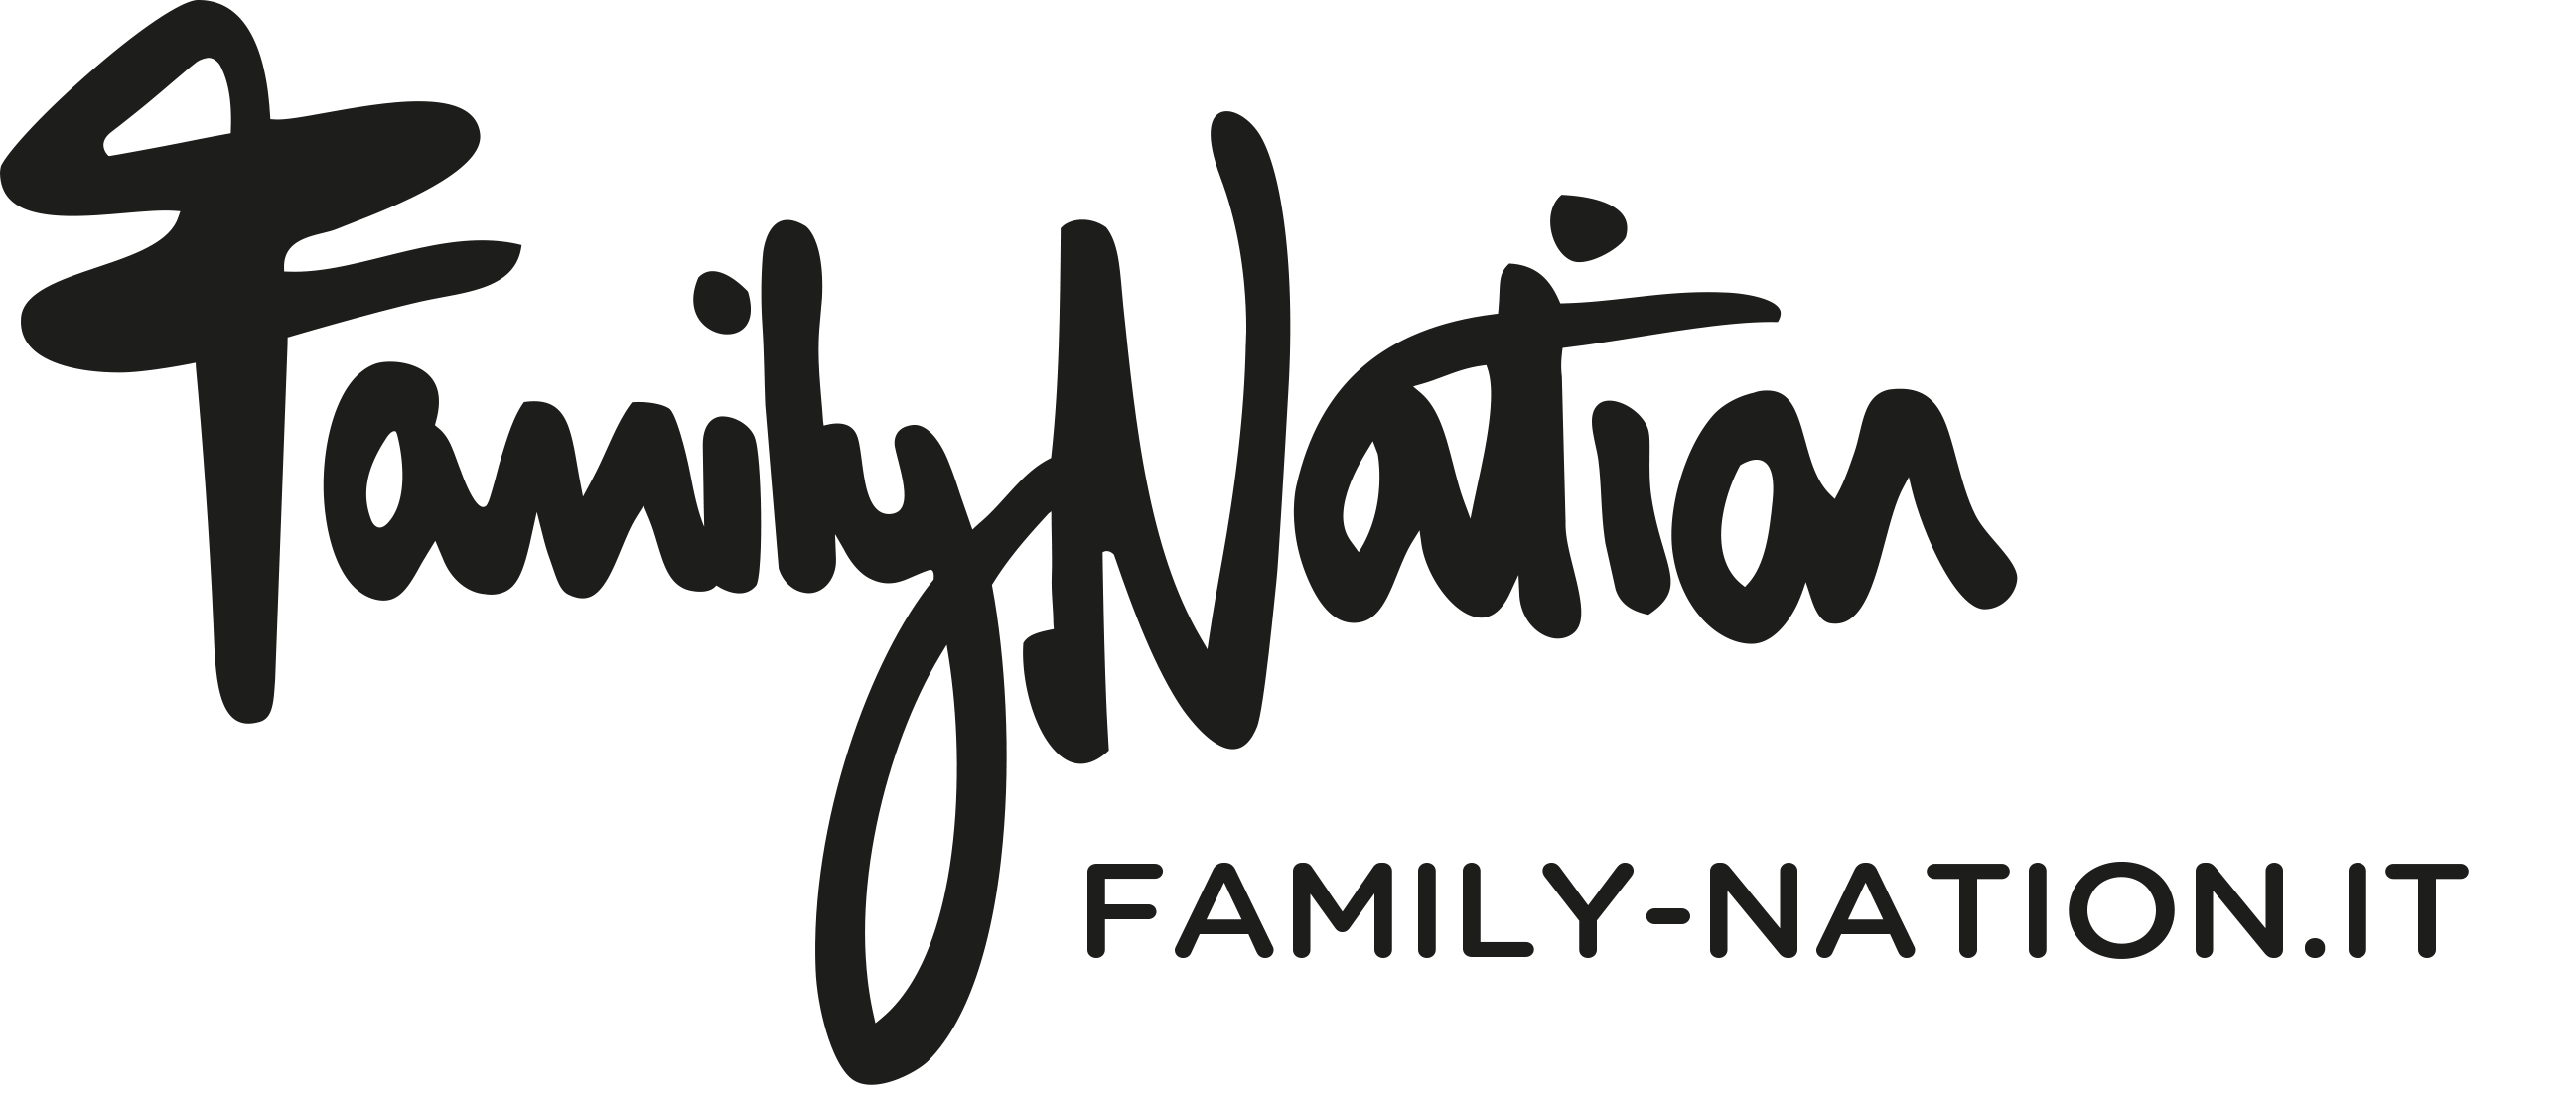 (c) Family-nation.it